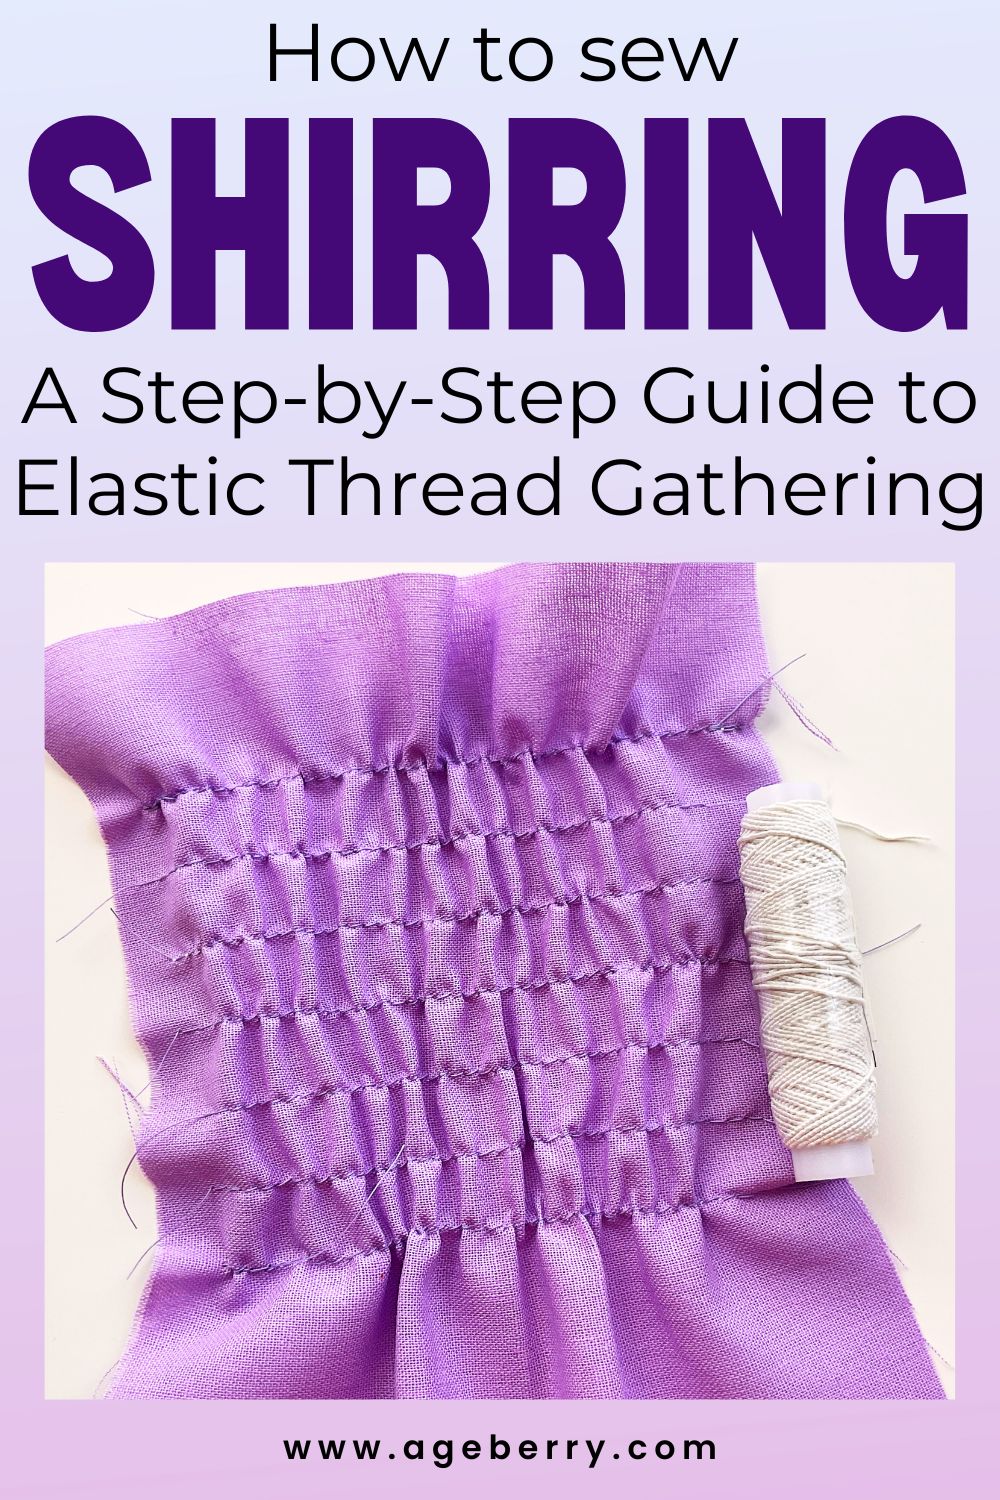 How to Sew Shirring A Step-by-Step Guide to Elastic Thread Gathering